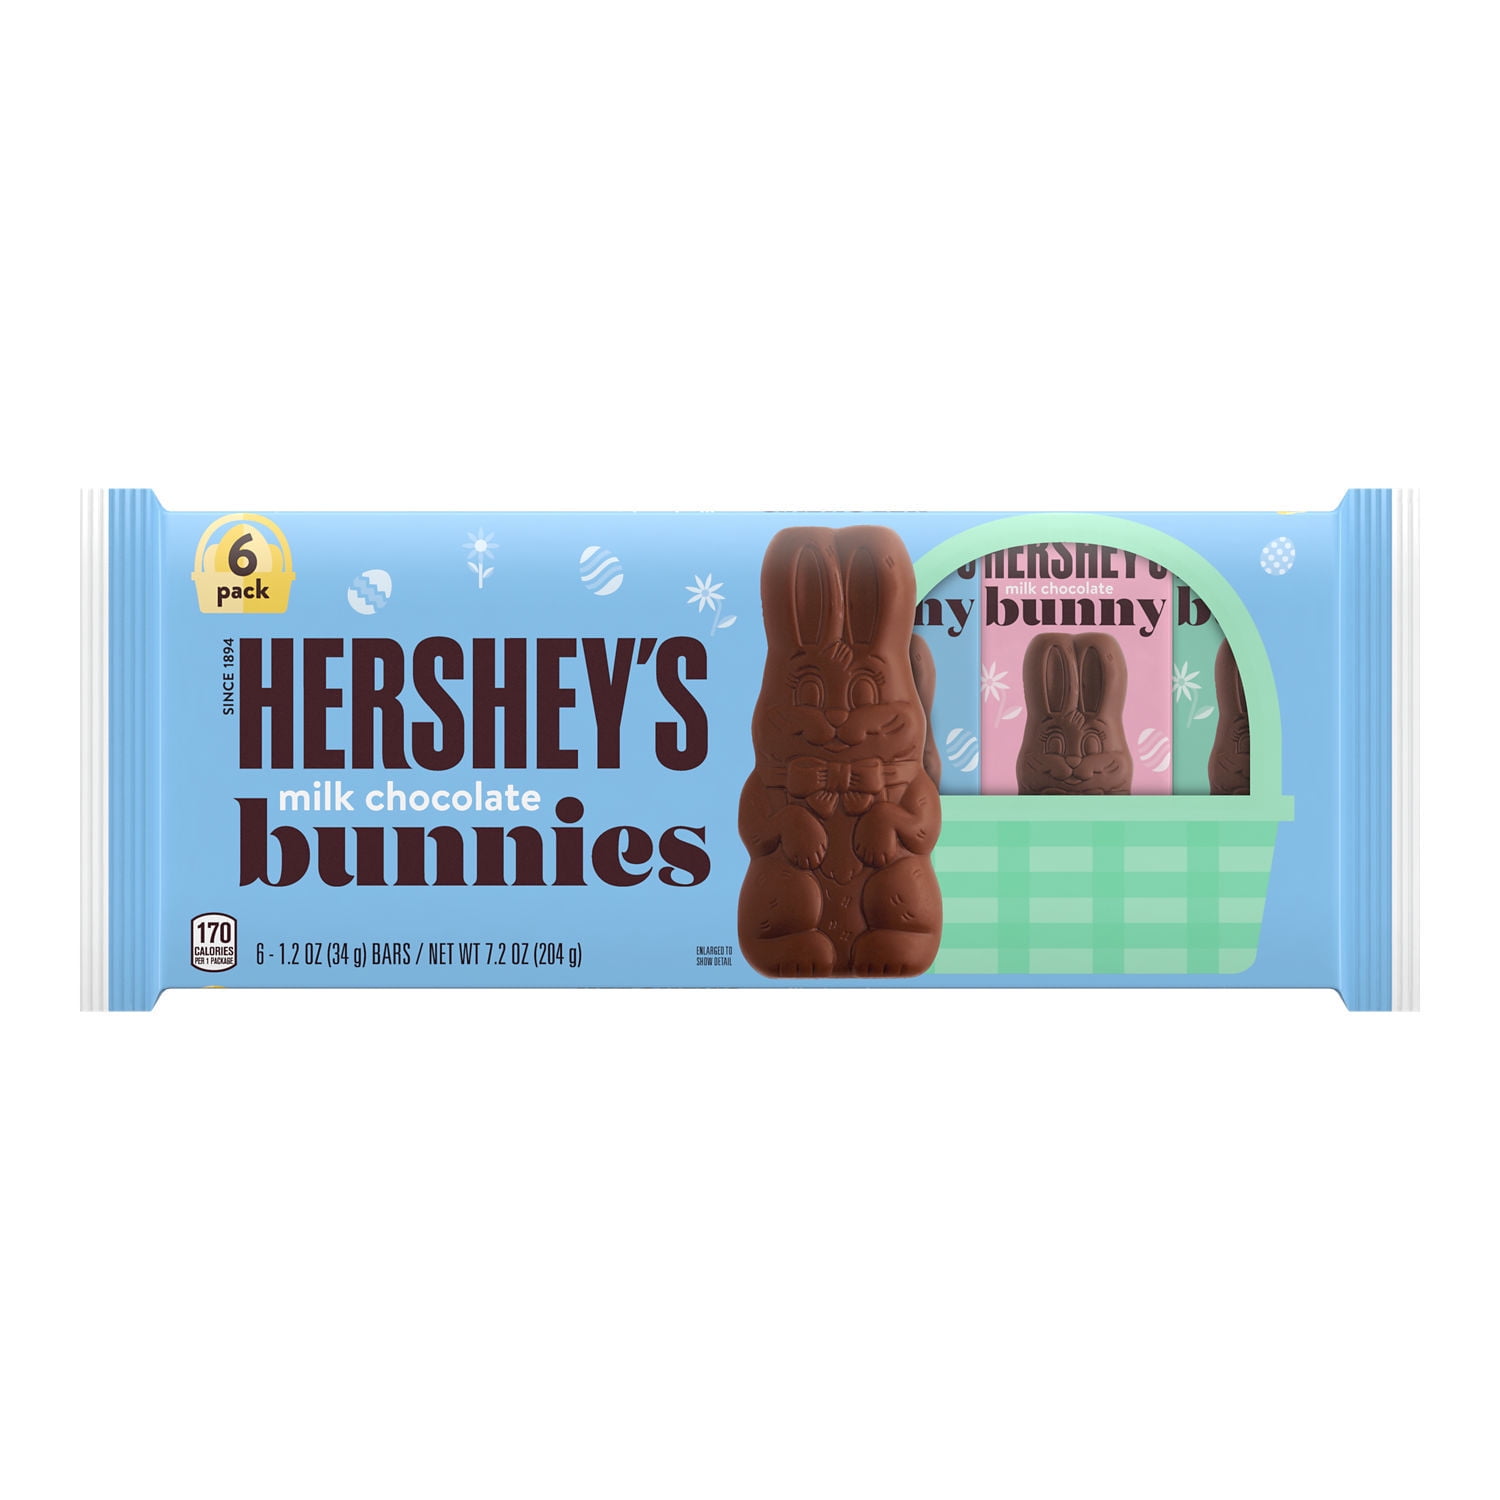 HERSHEY'S, Milk Chocolate Bunnies, Easter Candy, 1.2 oz, Packs (6 Count)